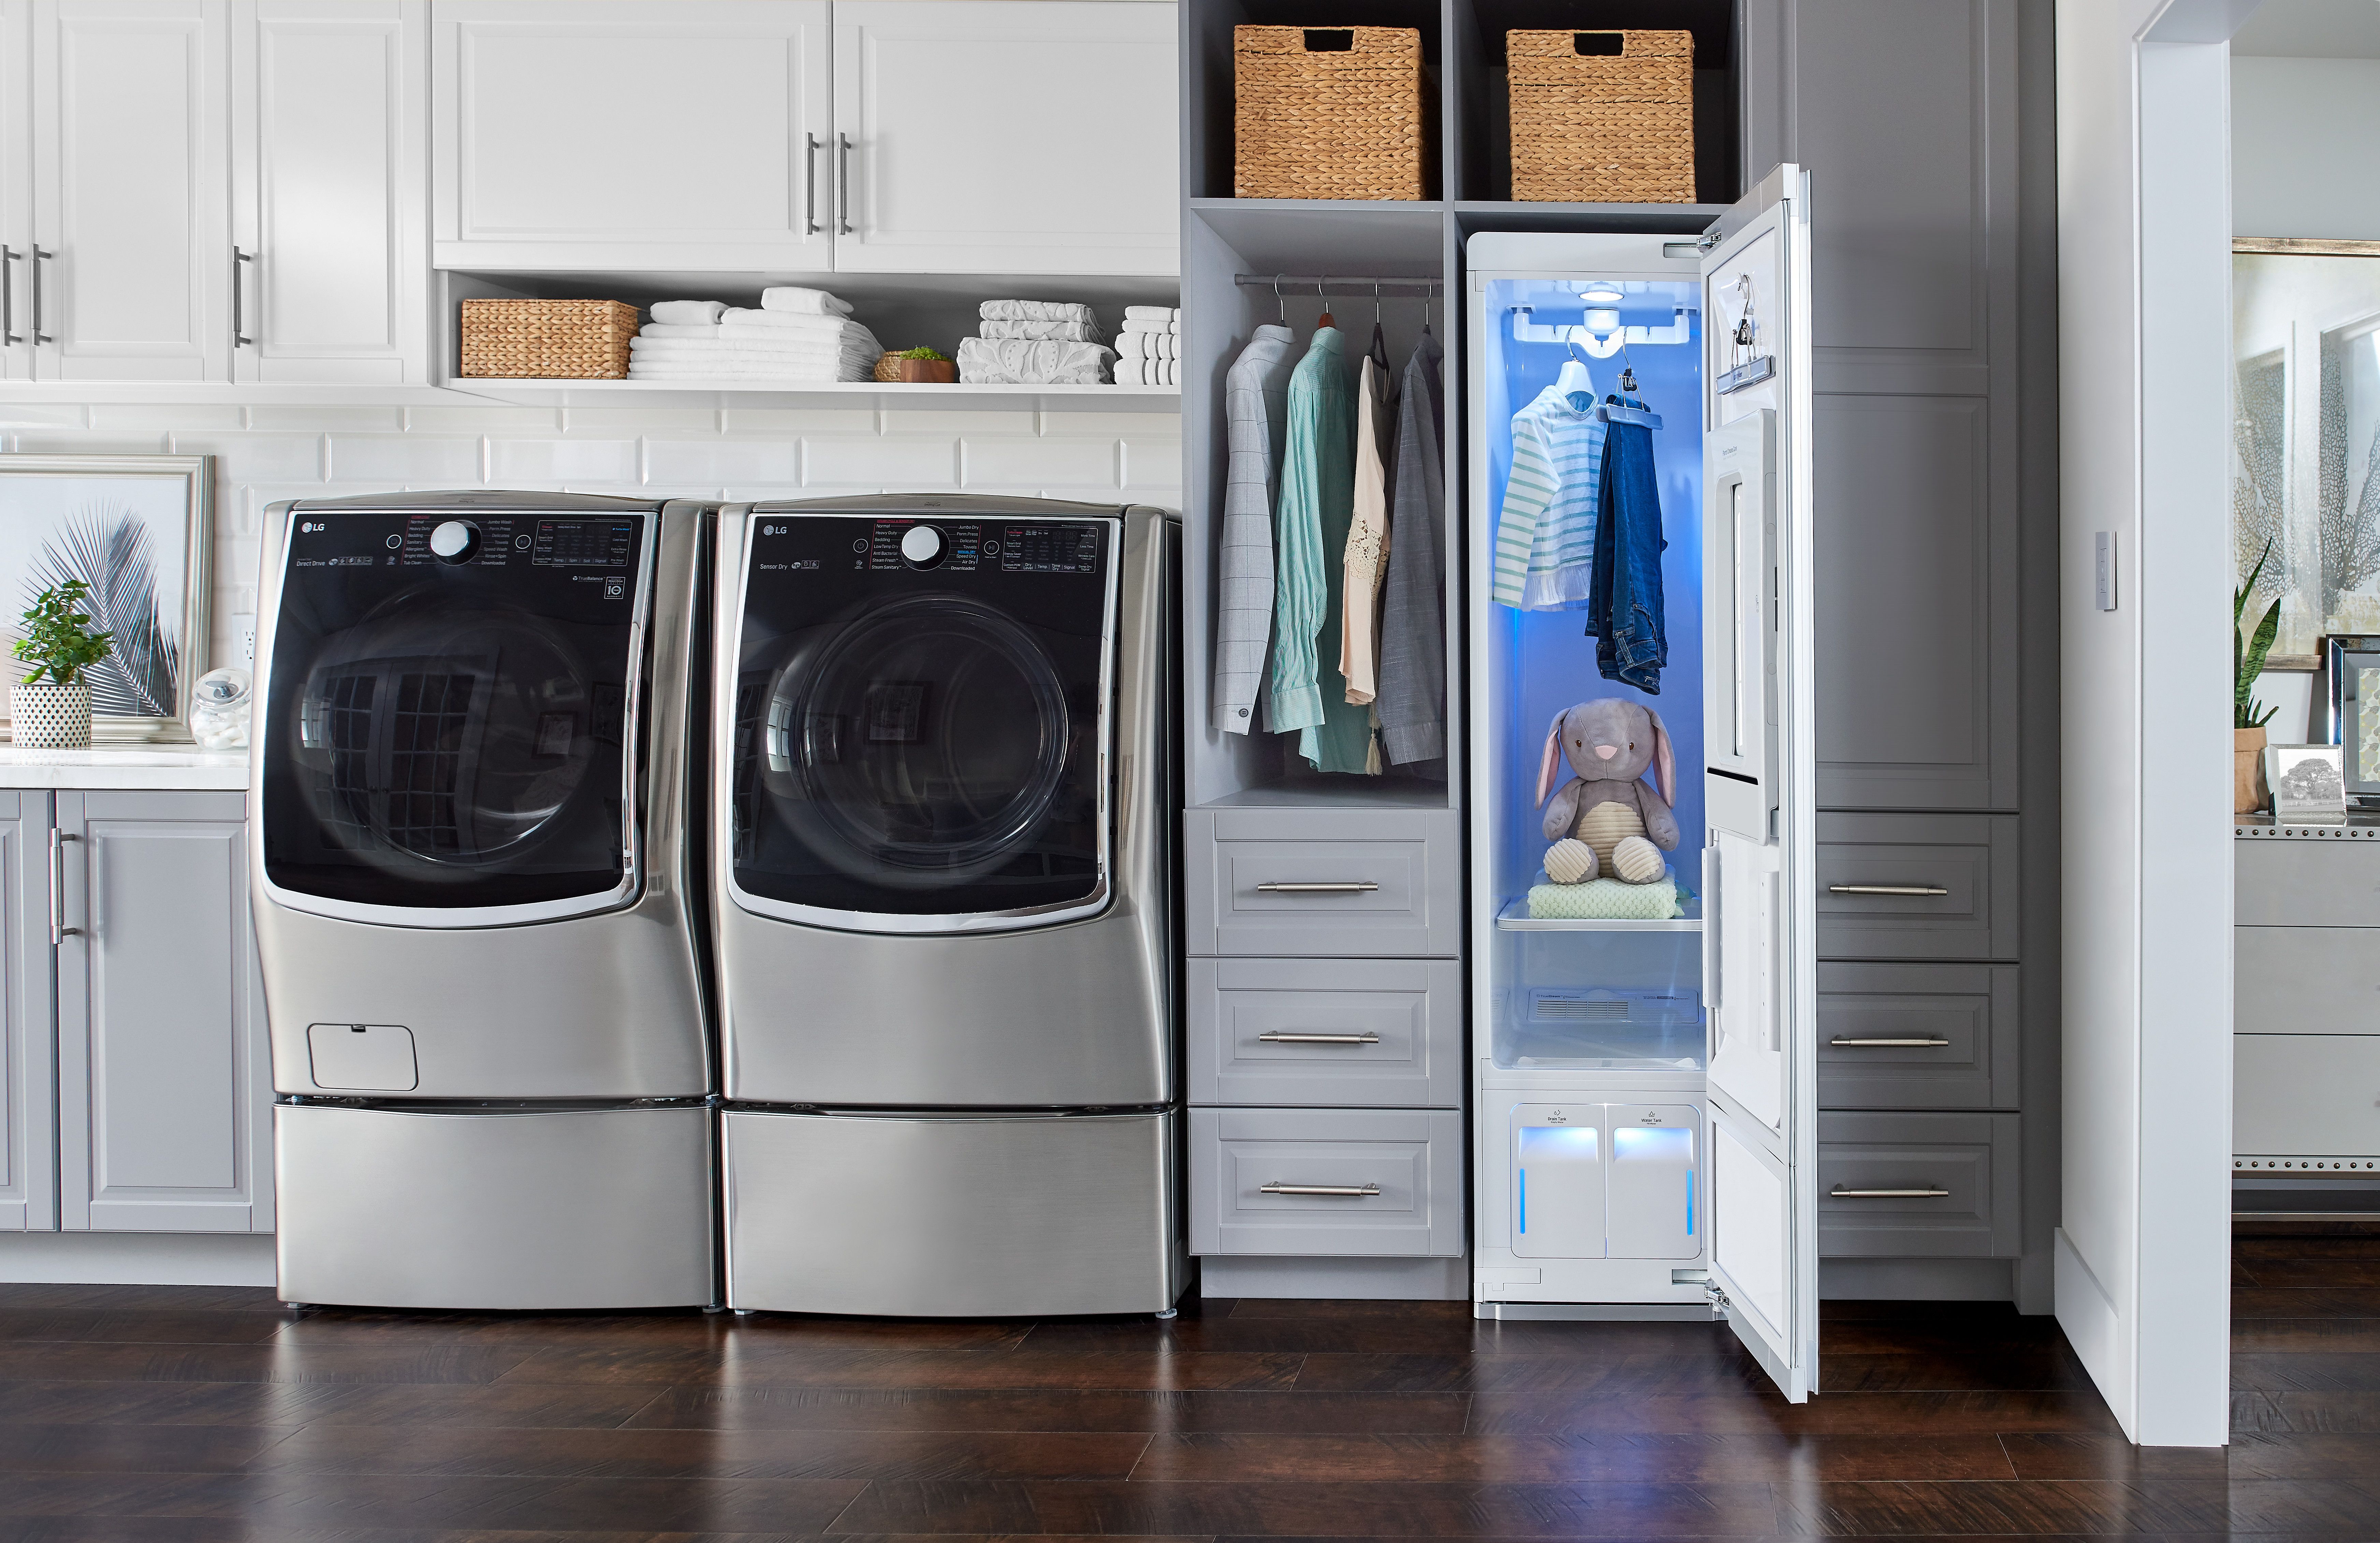 15 Clever Laundry Room Ideas - How to Organize a Laundry Room